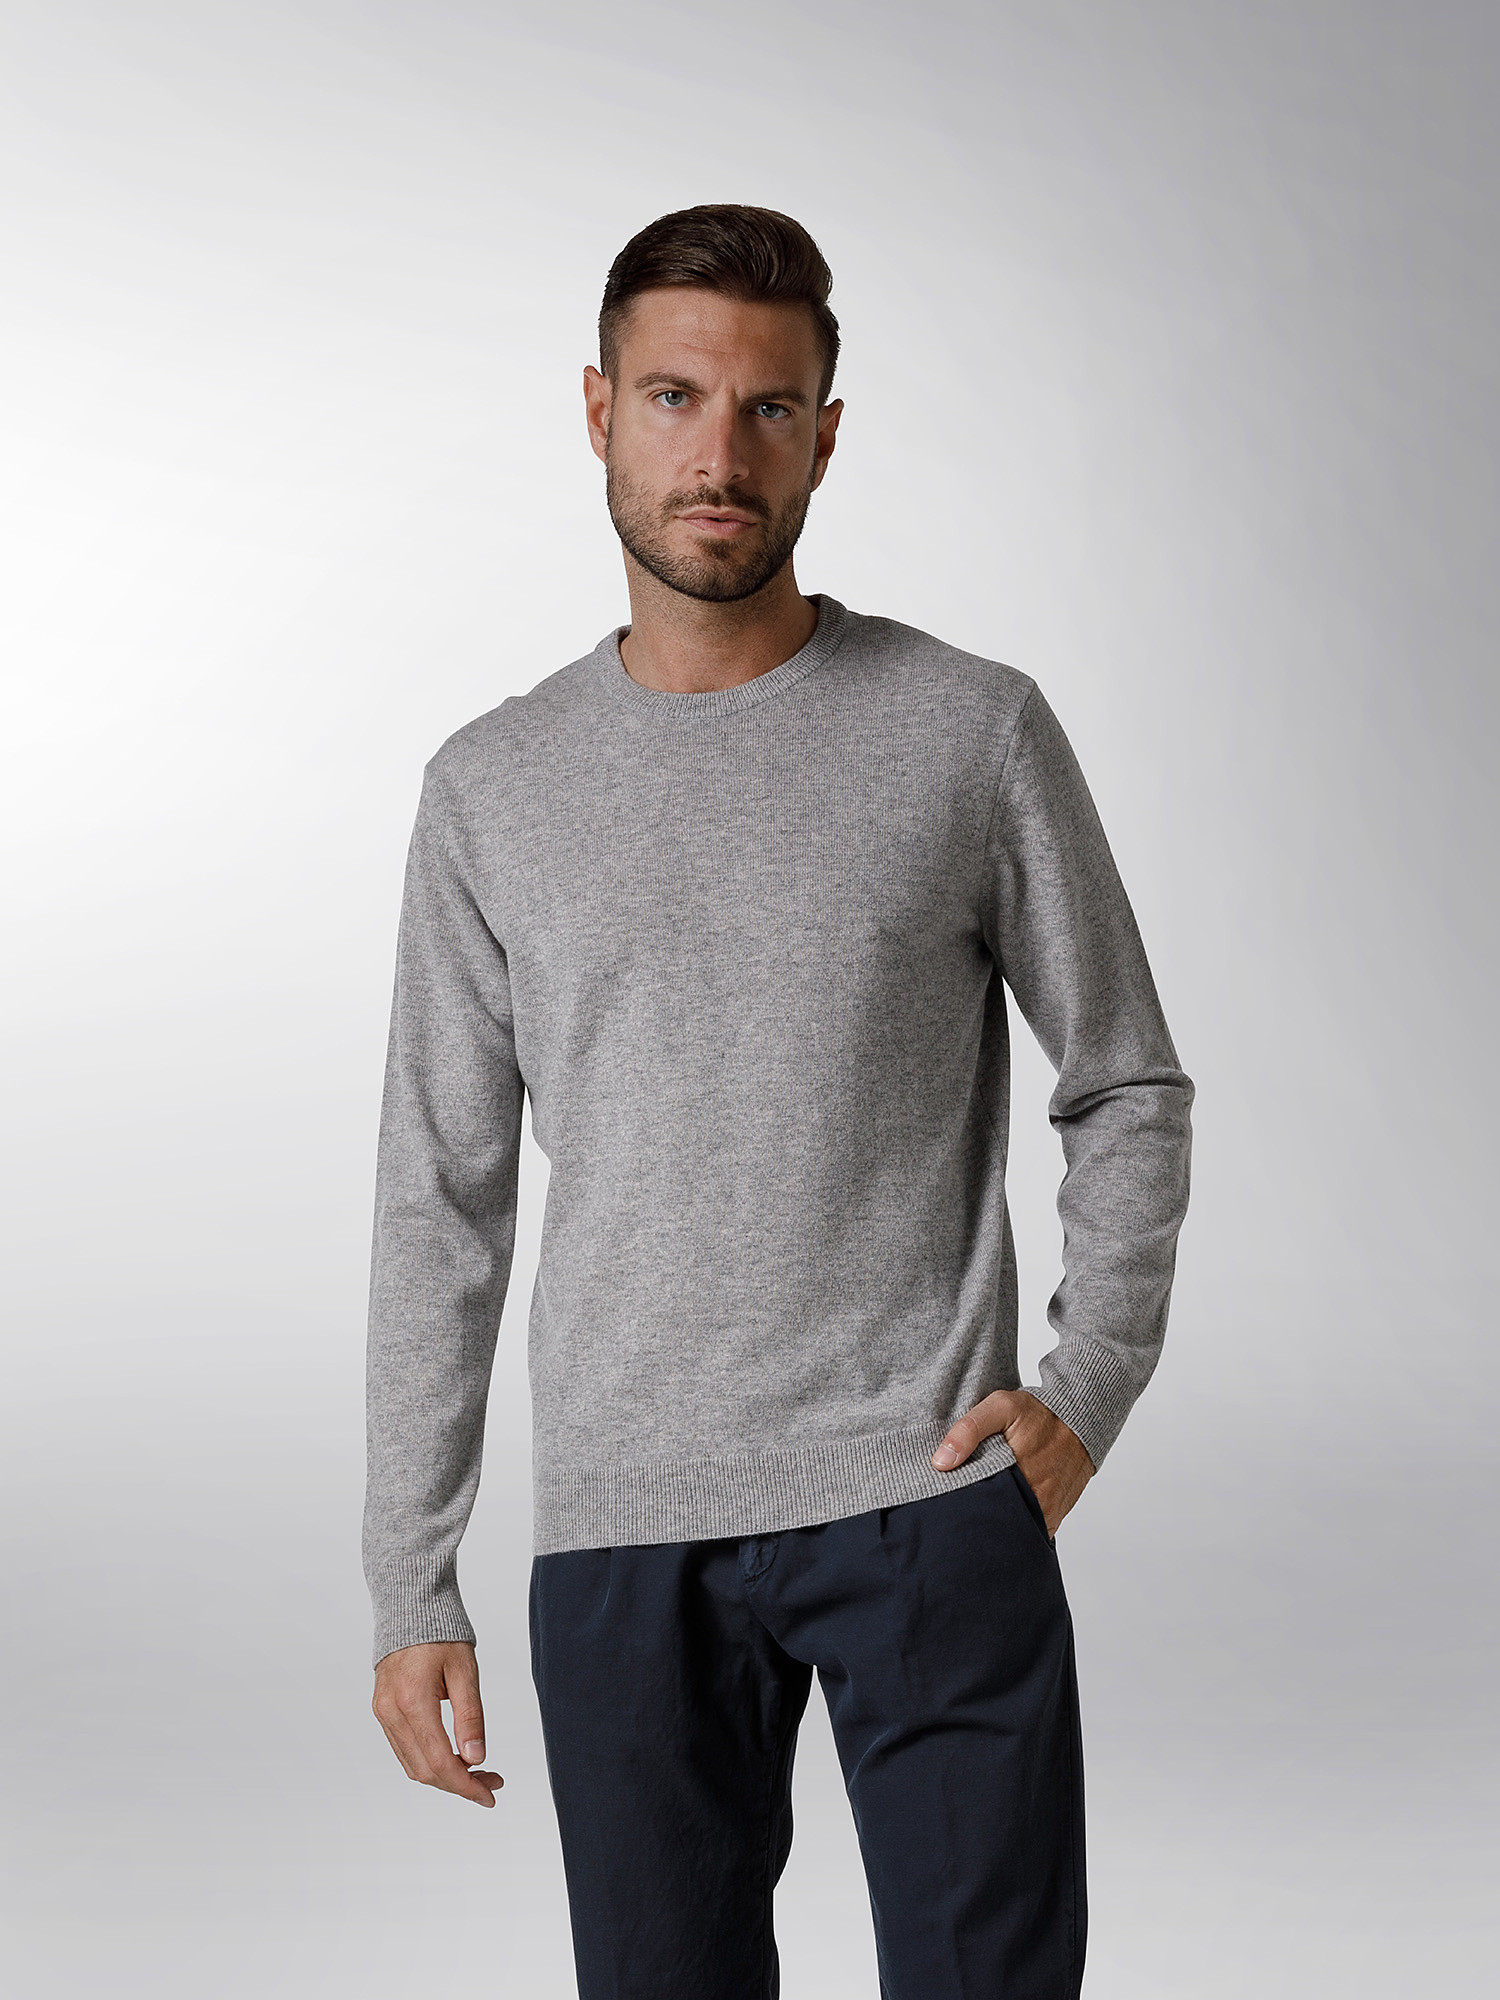 Coin Cashmere - Crewneck sweater in pure premium cashmere, Light Grey, large image number 1